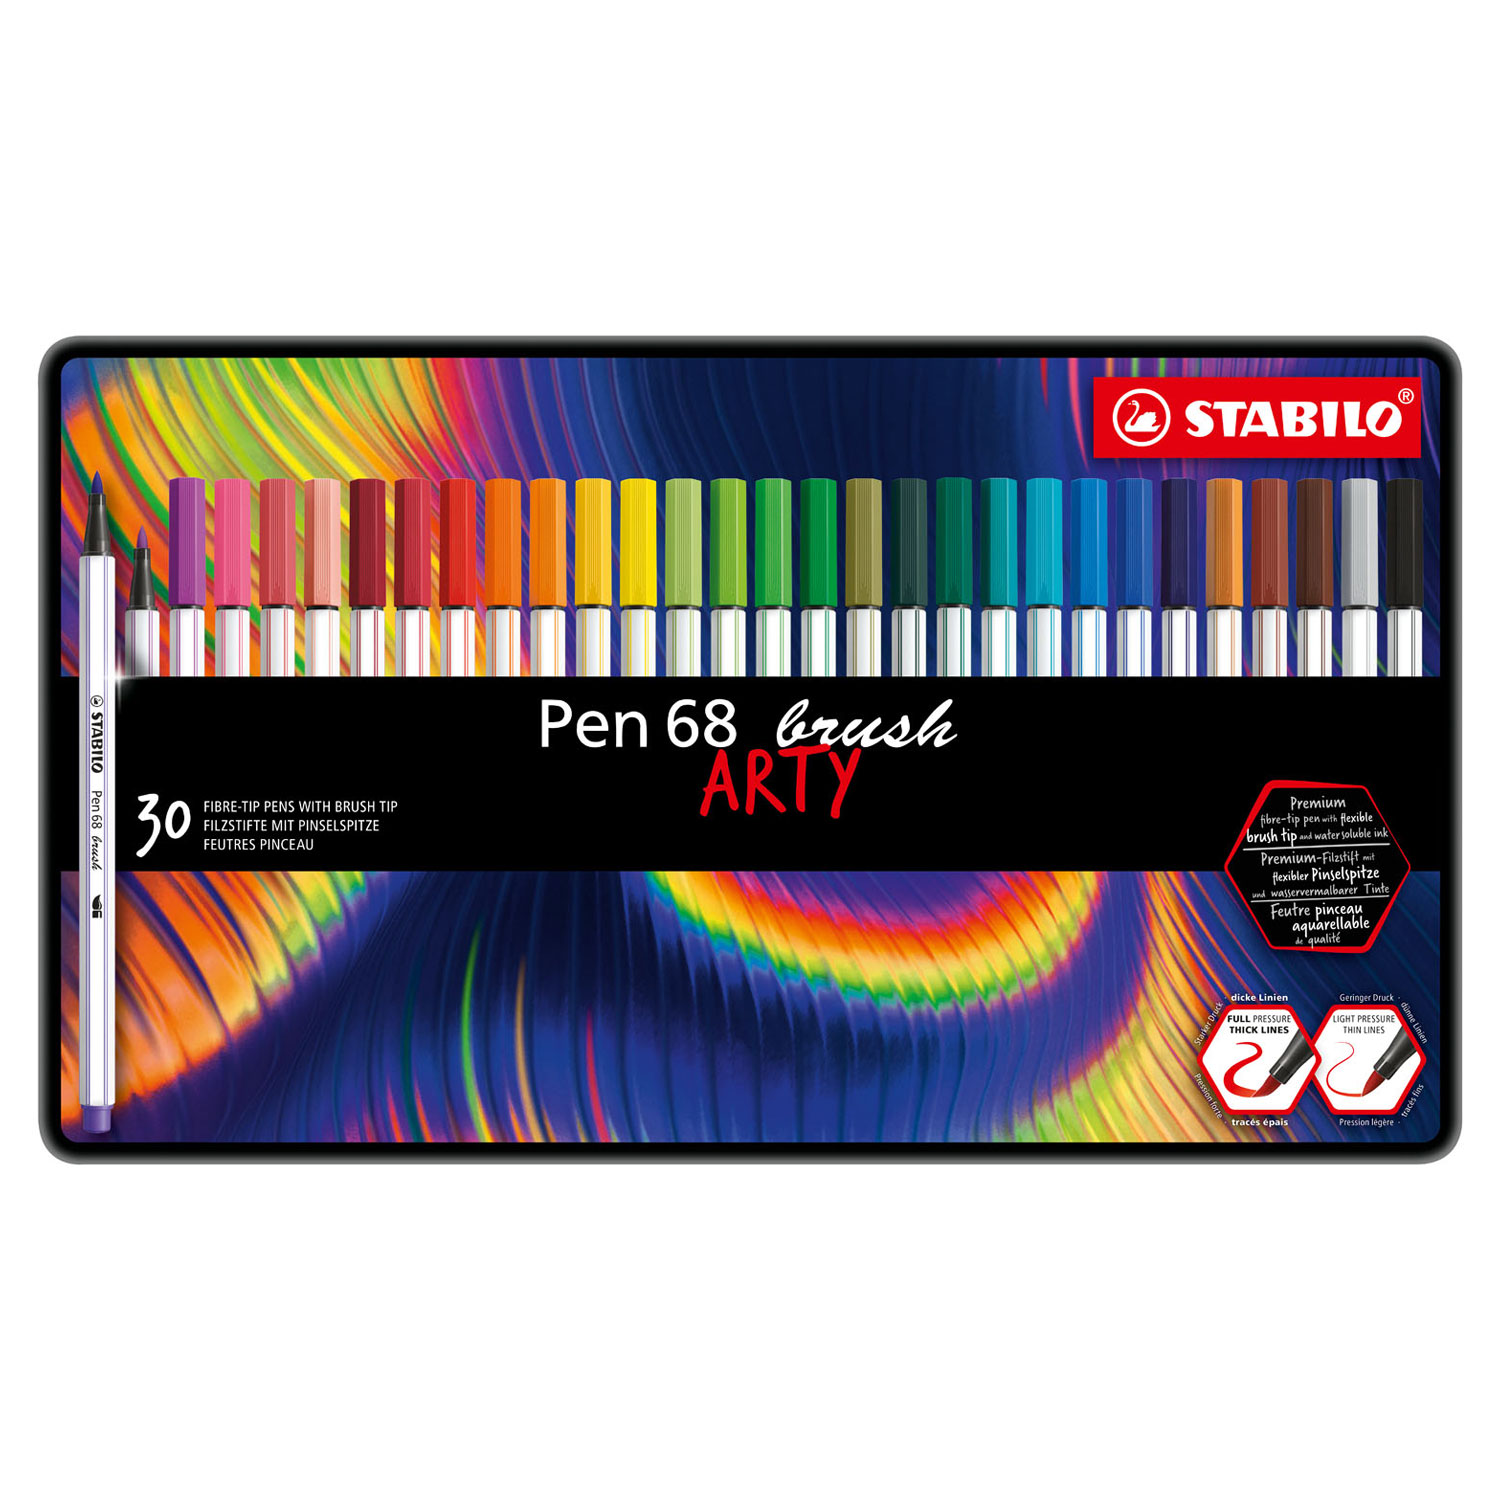 STABILO Pen 68 Brush - 25 Colours Metal Case - Flashcards and